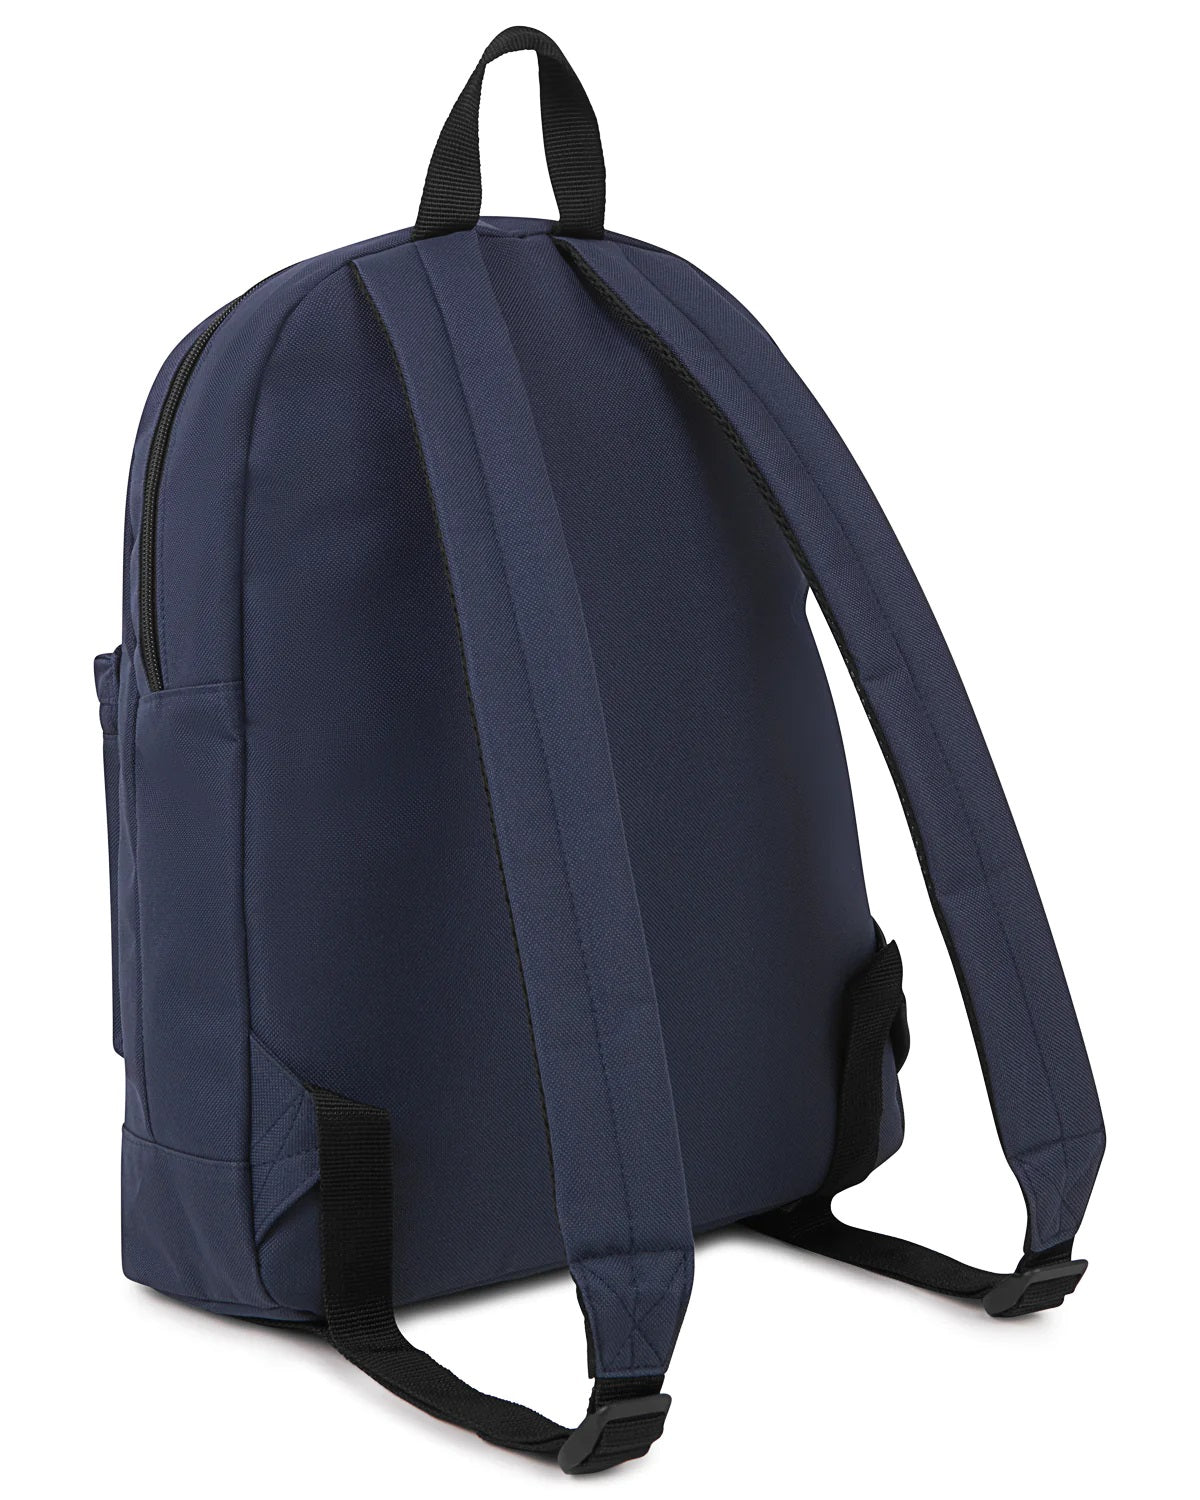 Lyle & Scott Classic Backpack/ Rucksack With Golden Eagle Logo, 02, Ba1200A, Navy